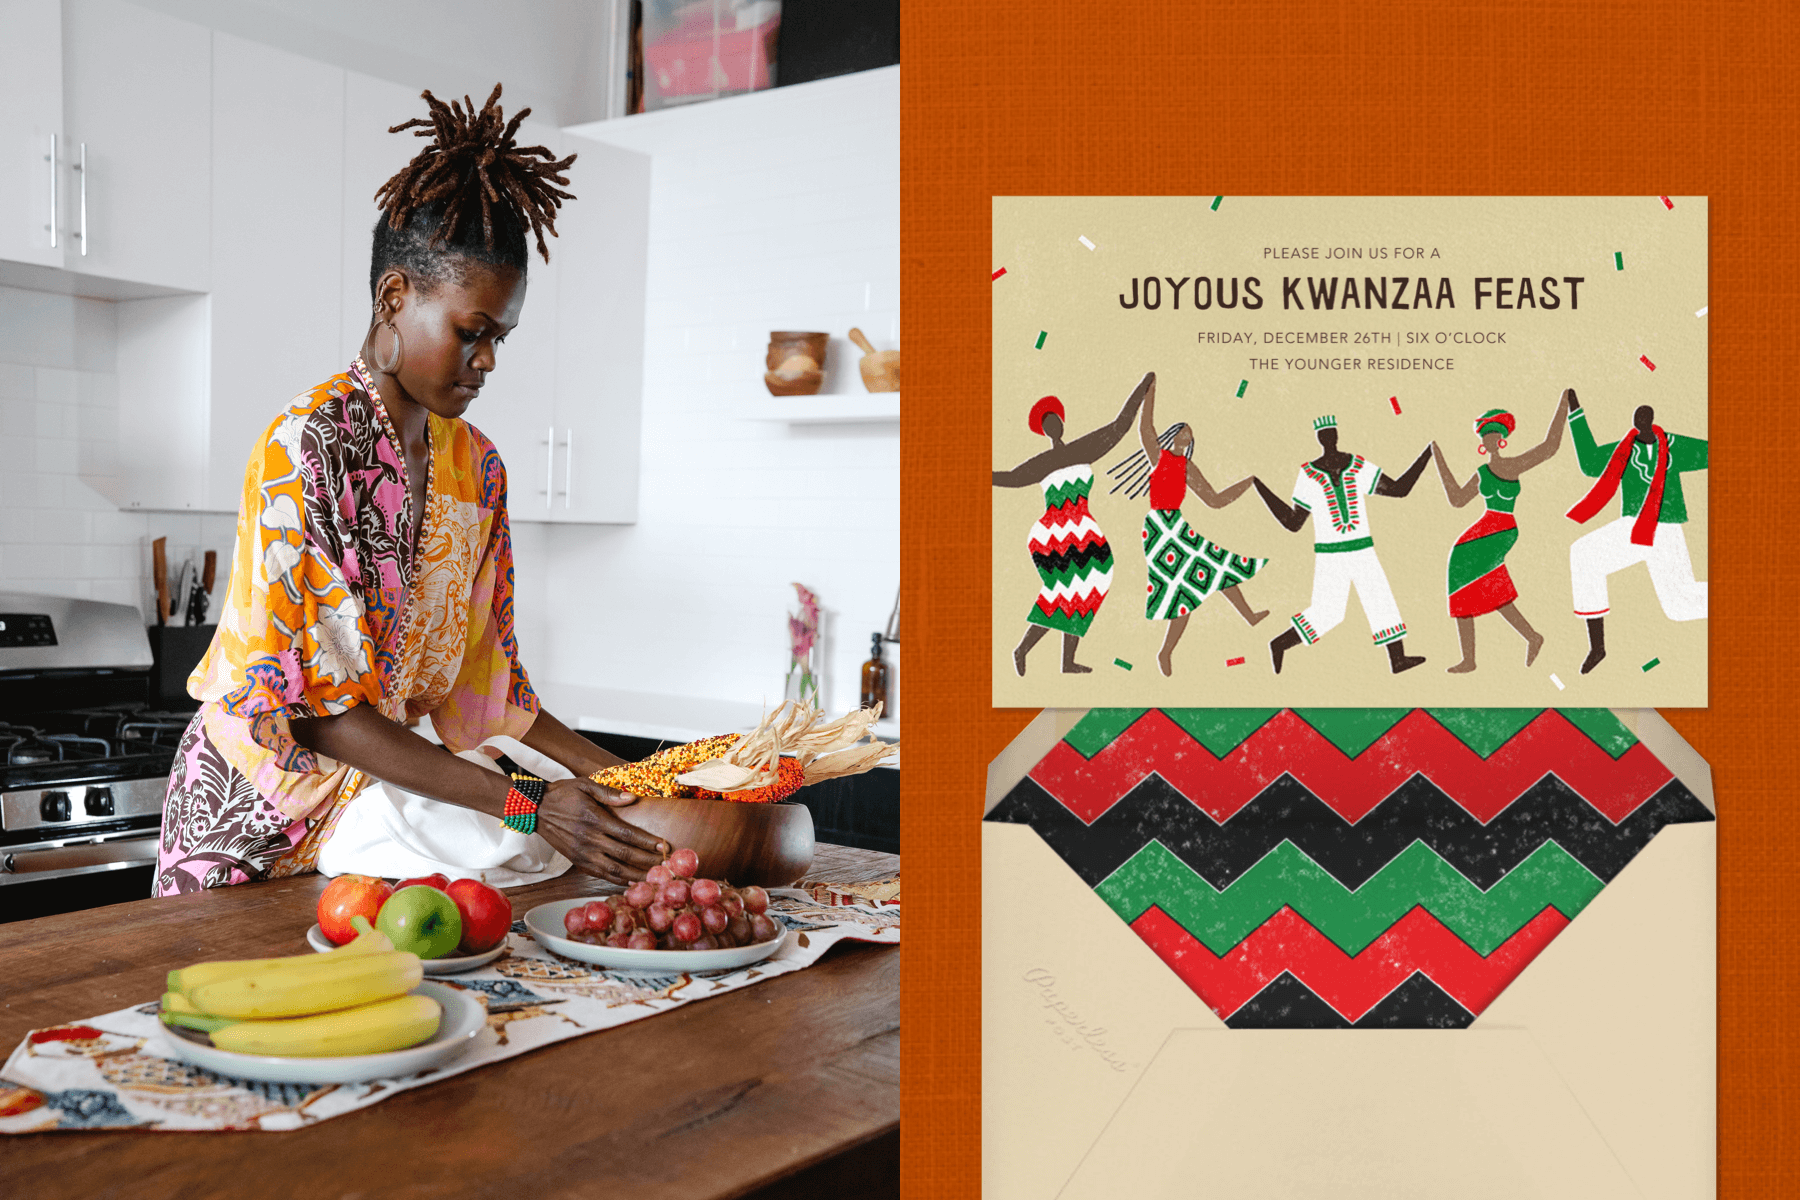 Left: A woman prepares a Kwanzaa table. | Right: A Kwanzaa invitation featuring an illustration of people dancing in African clothing.